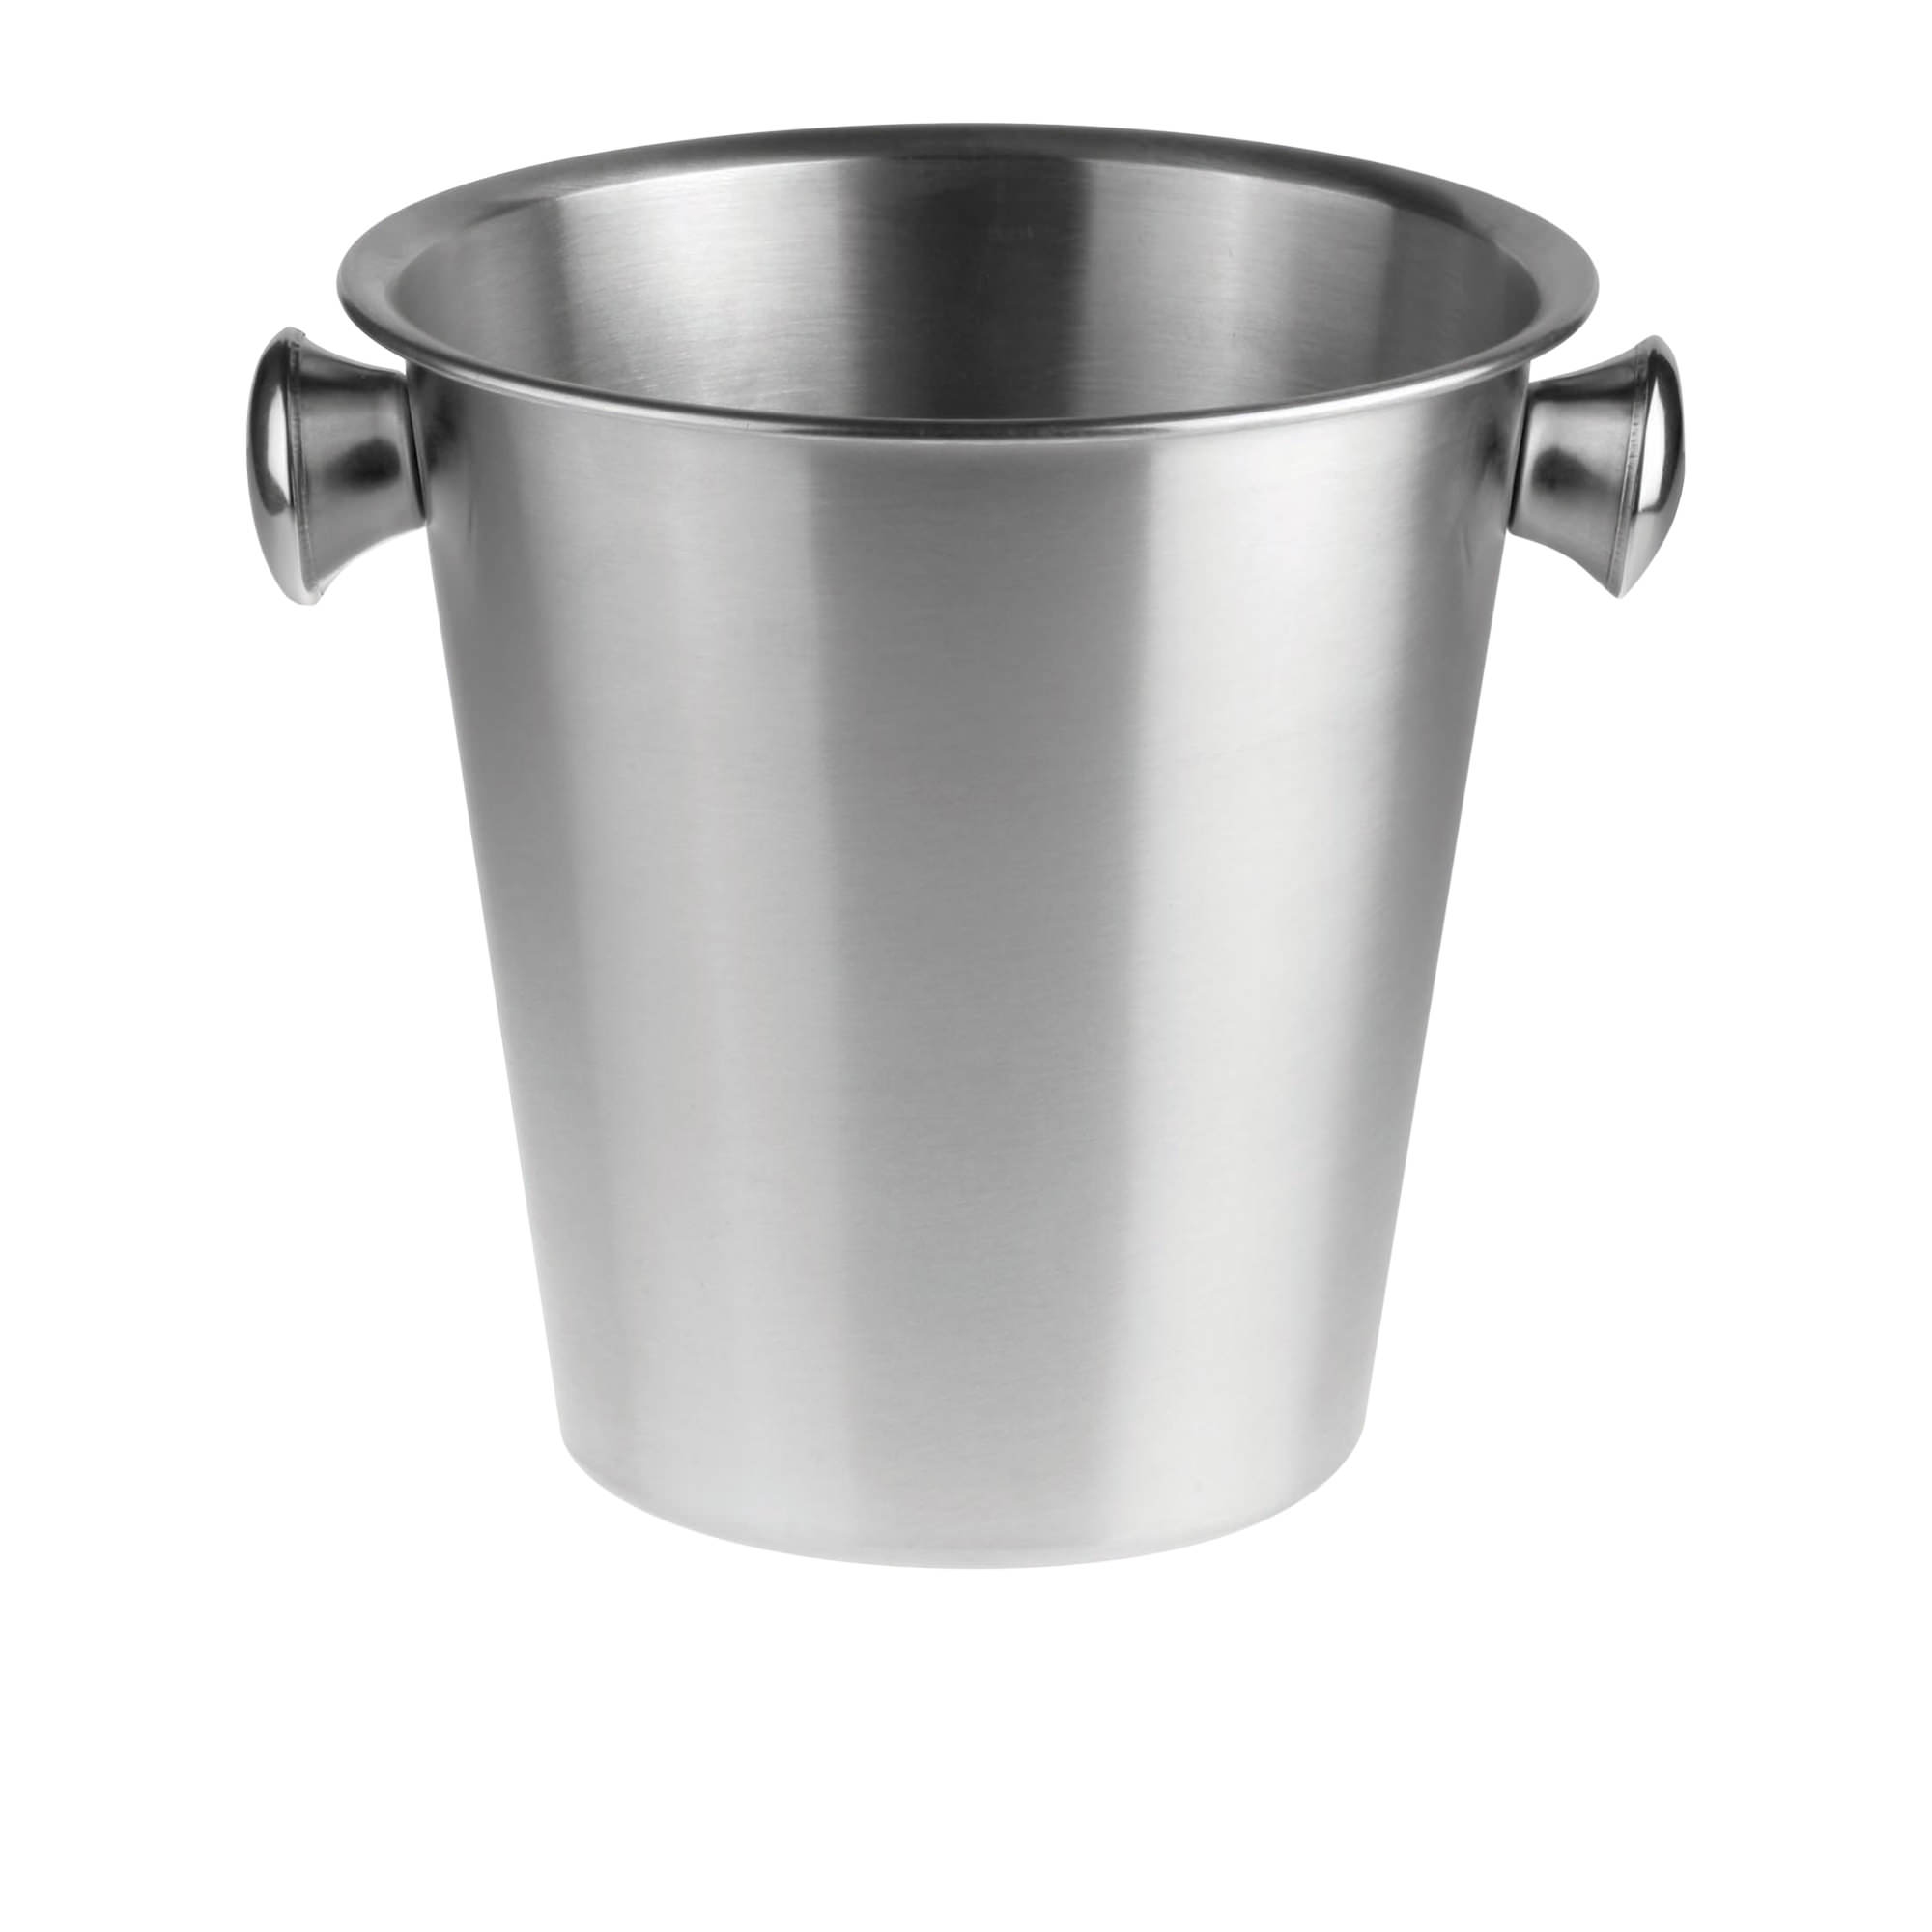 Chef Inox Stainless Steel Ice Bucket 4L Image 1